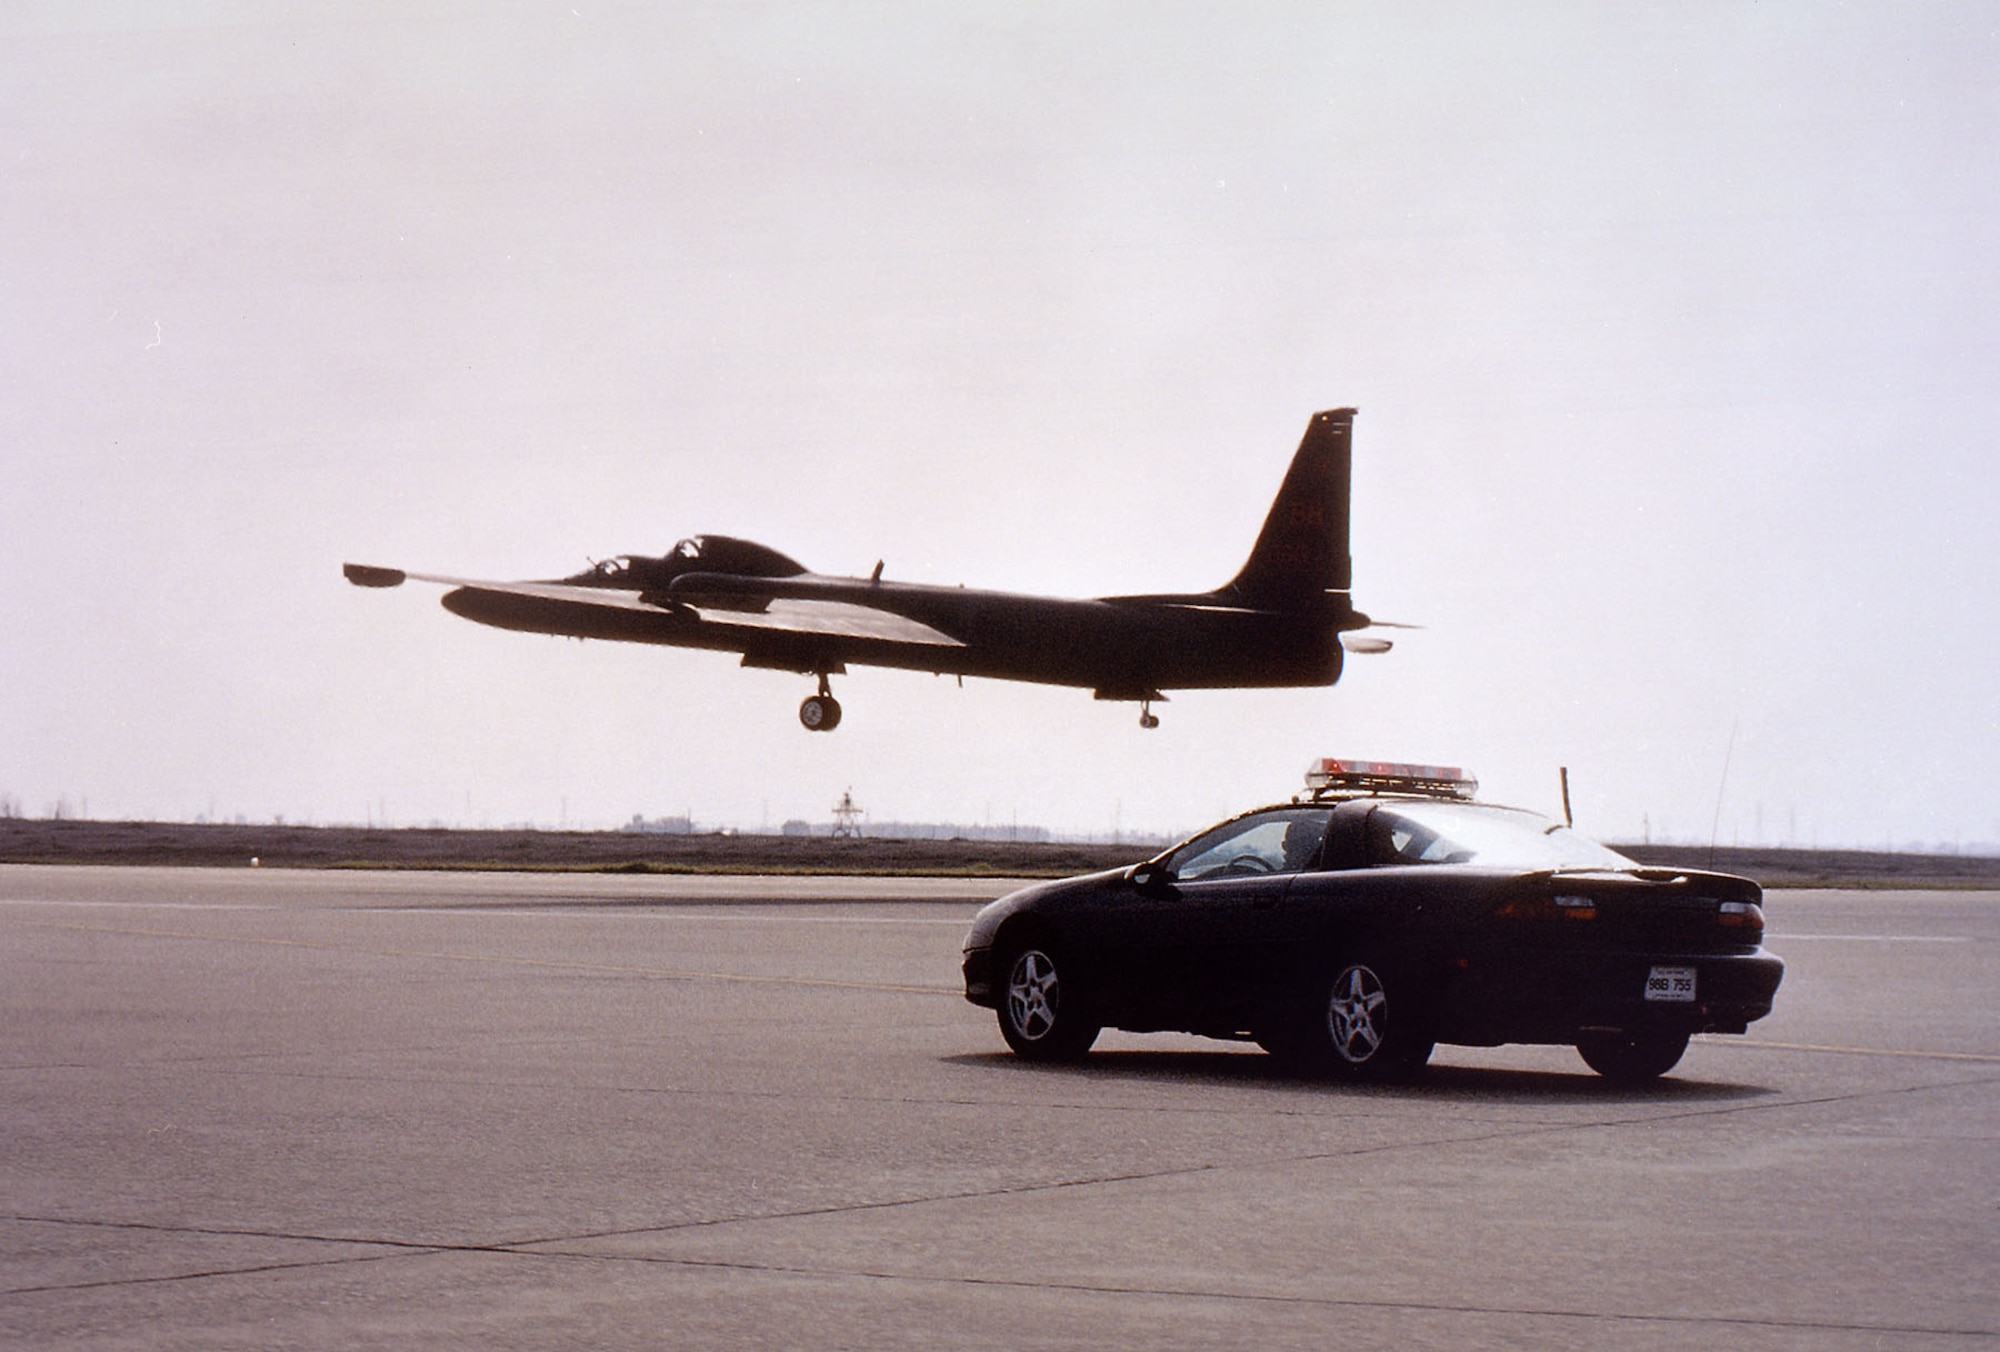 Dual cockpit TU-2S, the training version of the U-2 in which the instructor sits behind the student, being followed down the runway during landing by a chase car. (U.S. Air Force photo)